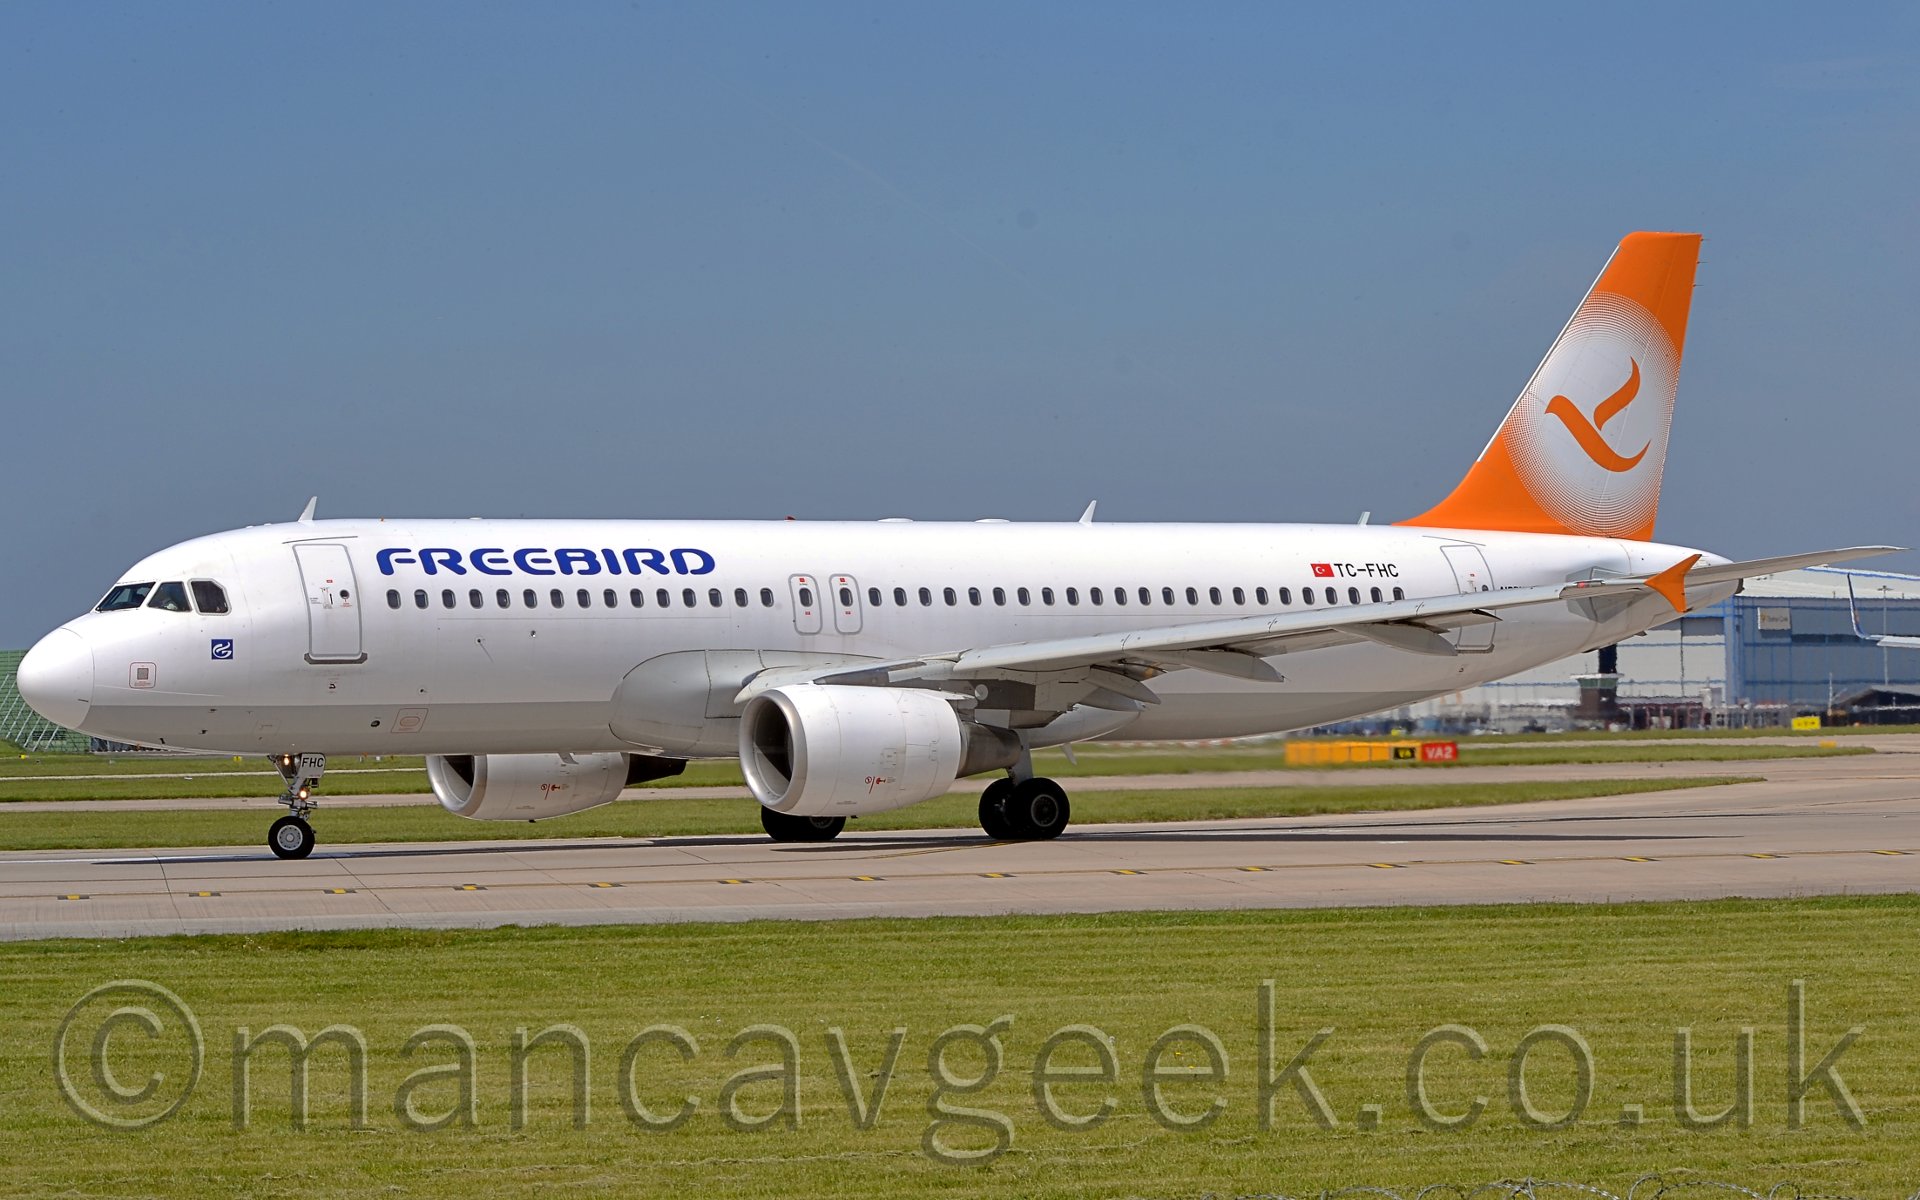 Side view of a twin engoinned jet airliner taxiing from right to left, turning slightly away from the camera. The plane is mostly white, with a grey belly, and blue "FREEBIRD" titles on the upper forward fuselage. There are orange vertical endplates on the wingtips. The tail is orange, with a white circle containing an orange flying bird. green grass fills most of the foreground, as well as a lare bit of background visible under the planes body. There is a large grey hangaron the laft of the frame, behind the planes tail. Above, the sky is a pale blue.